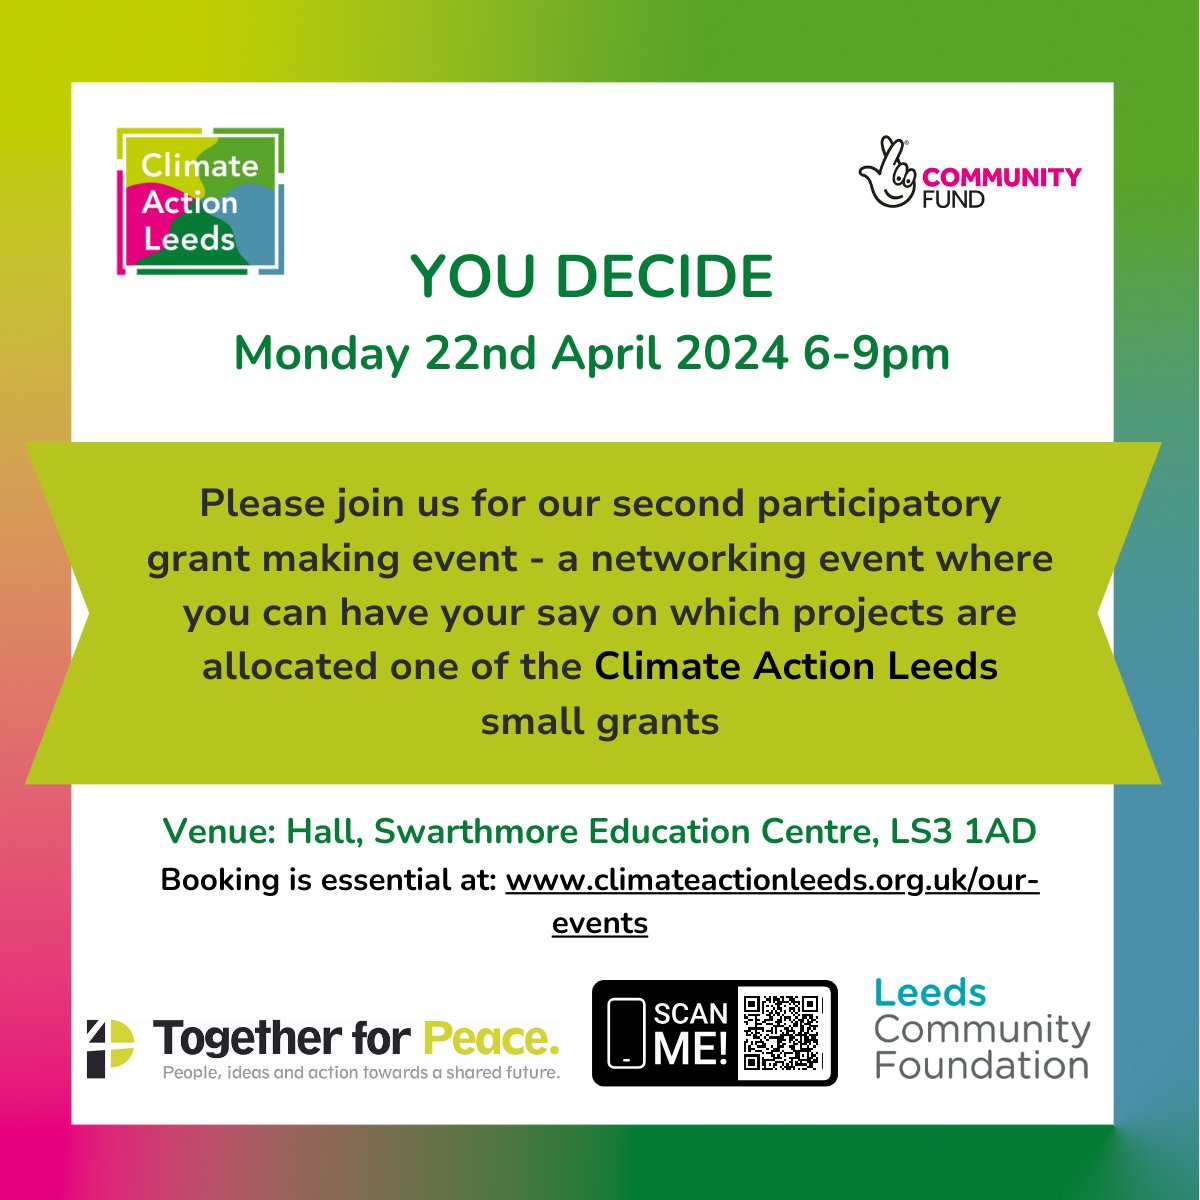 You Decide! Come along to our participatory grant making event on Monday 22nd April 6-9pm at Swarthmore Education Centre. for more info and to book go to: climateactionleeds.org.uk/our-events